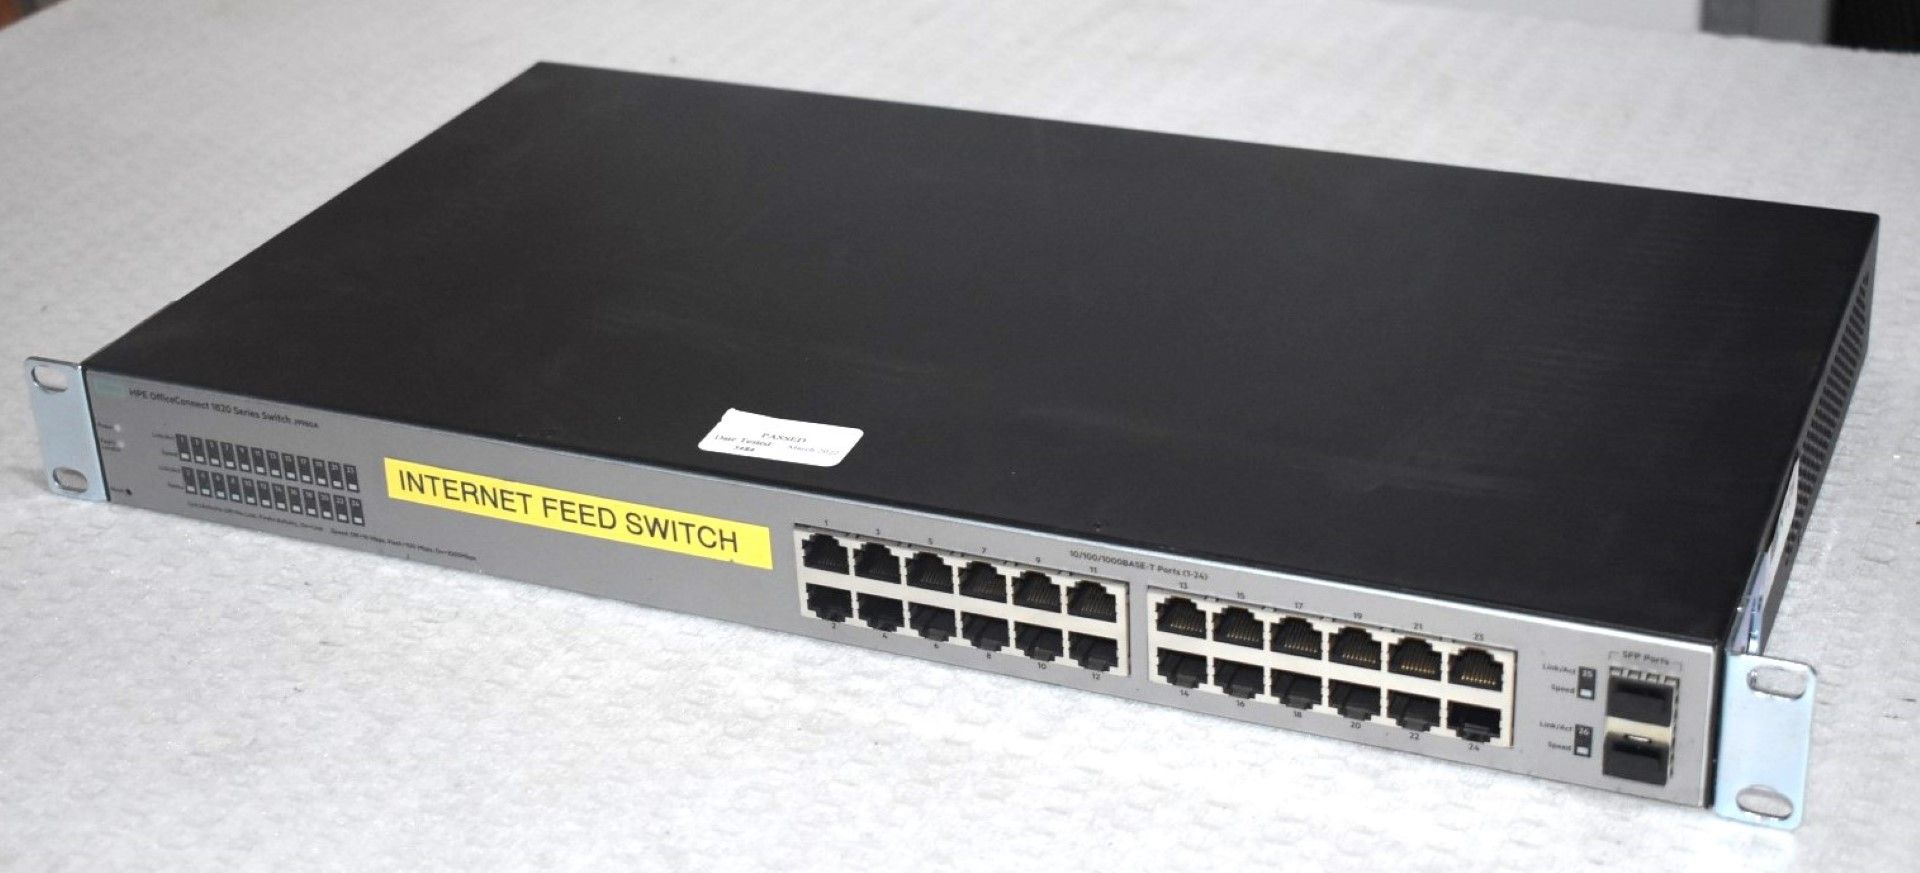 1 x HP Office Connect 1820 Series 24 Port Switch - Type J9980A - Image 2 of 4